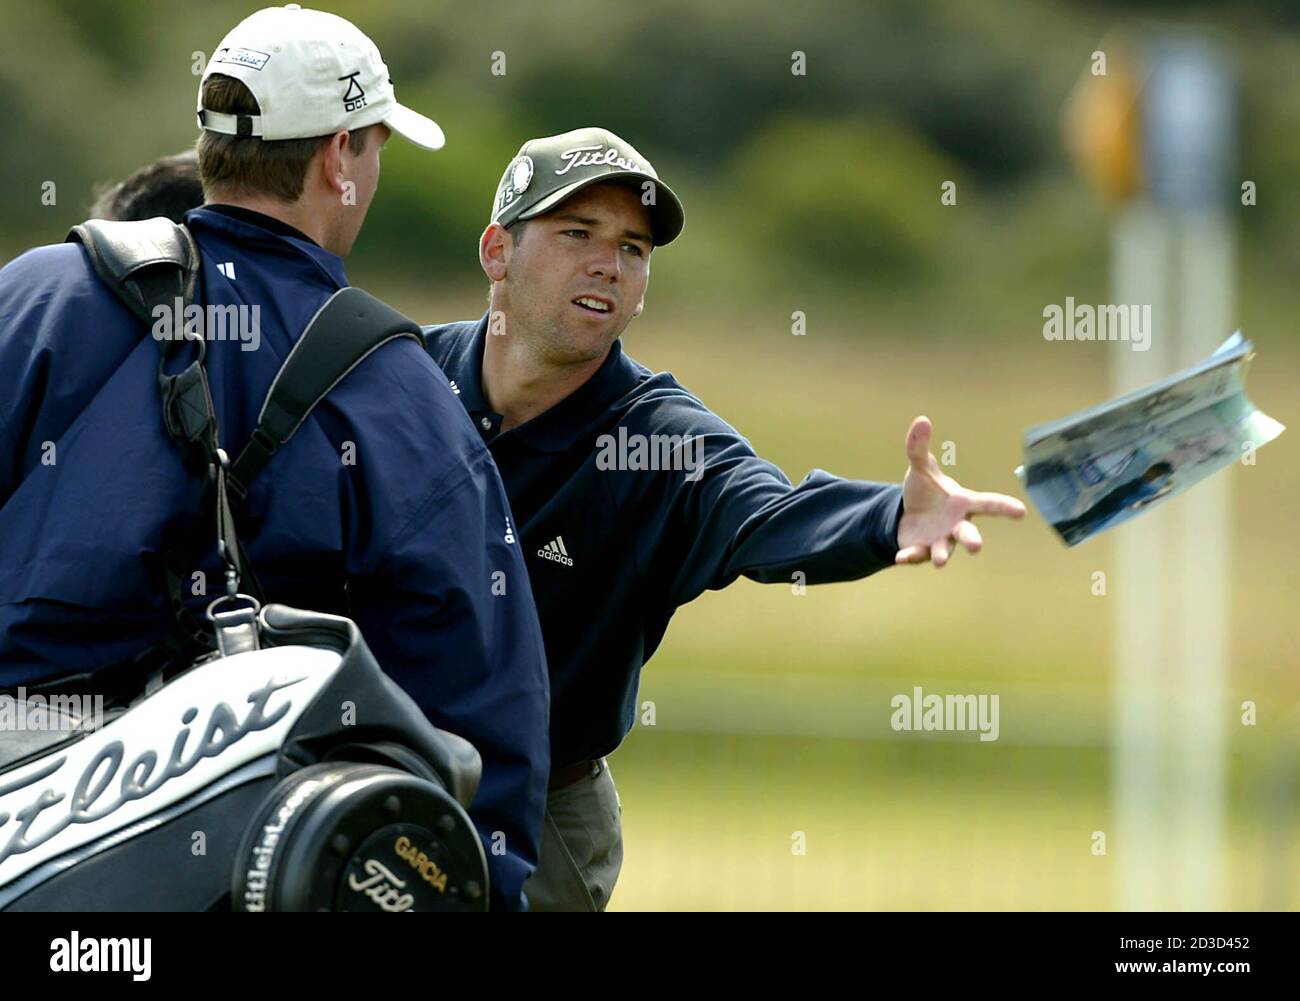 Spanish golfer Sergio Garcia throws a programe to an autograph hunter  during his practice round for the British Open Golf Championship at  Muirfield in Scotland, July15, 2002. The 131st Open Championship starts